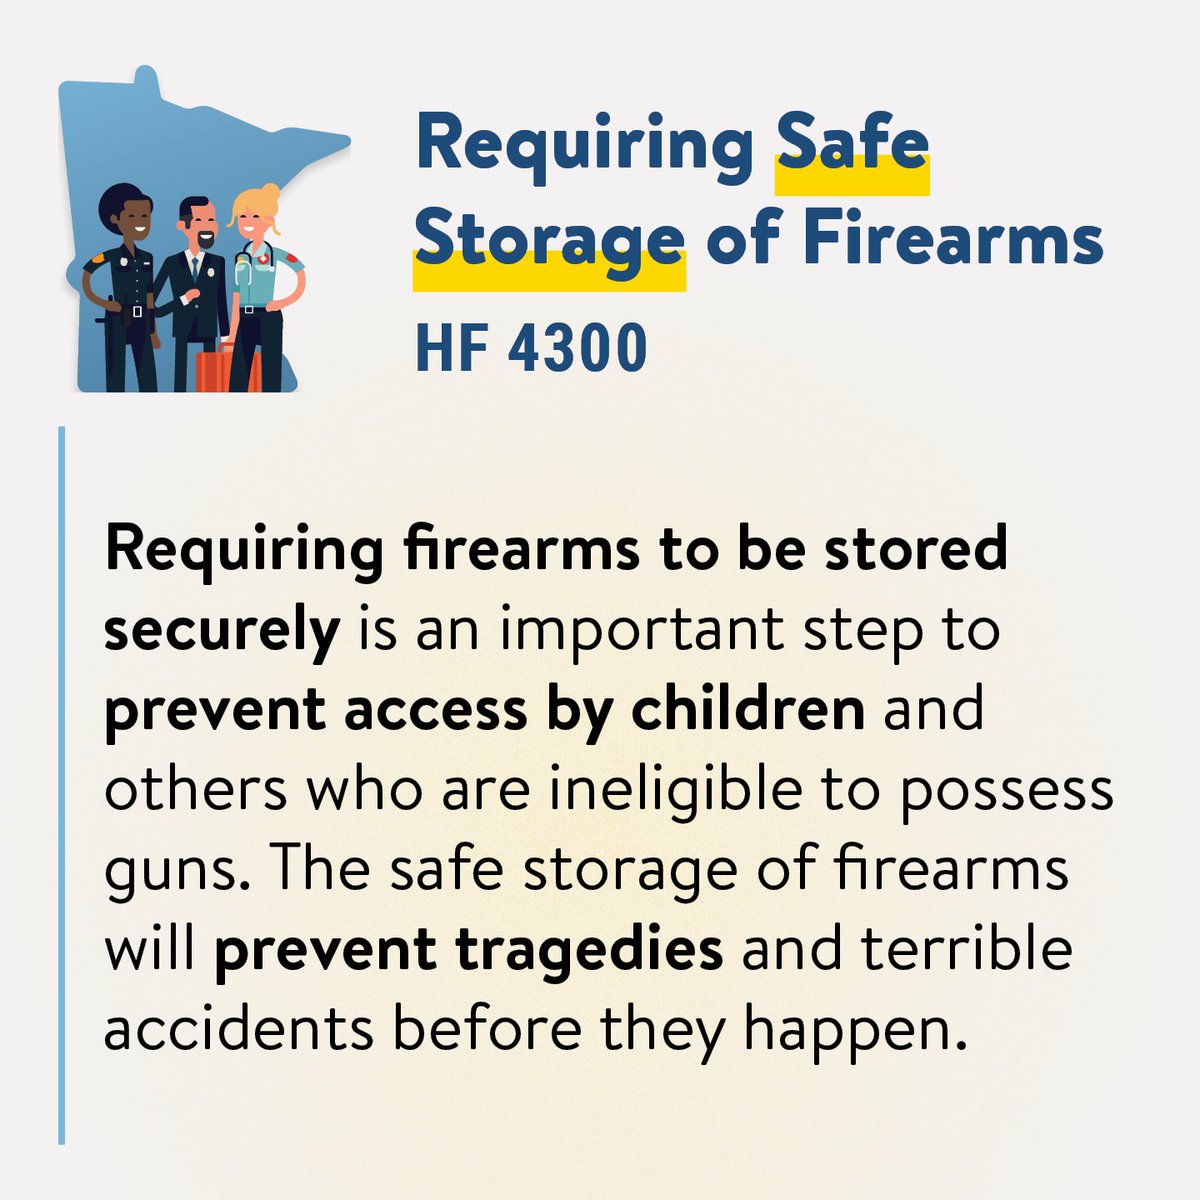 Gun violence is the leading cause of death among children. The House just passed a bill to require the safe storage of firearms, a step to help keep guns out of the hands of children who could seriously injure or kill themselves, a family member, or friend. #mnleg